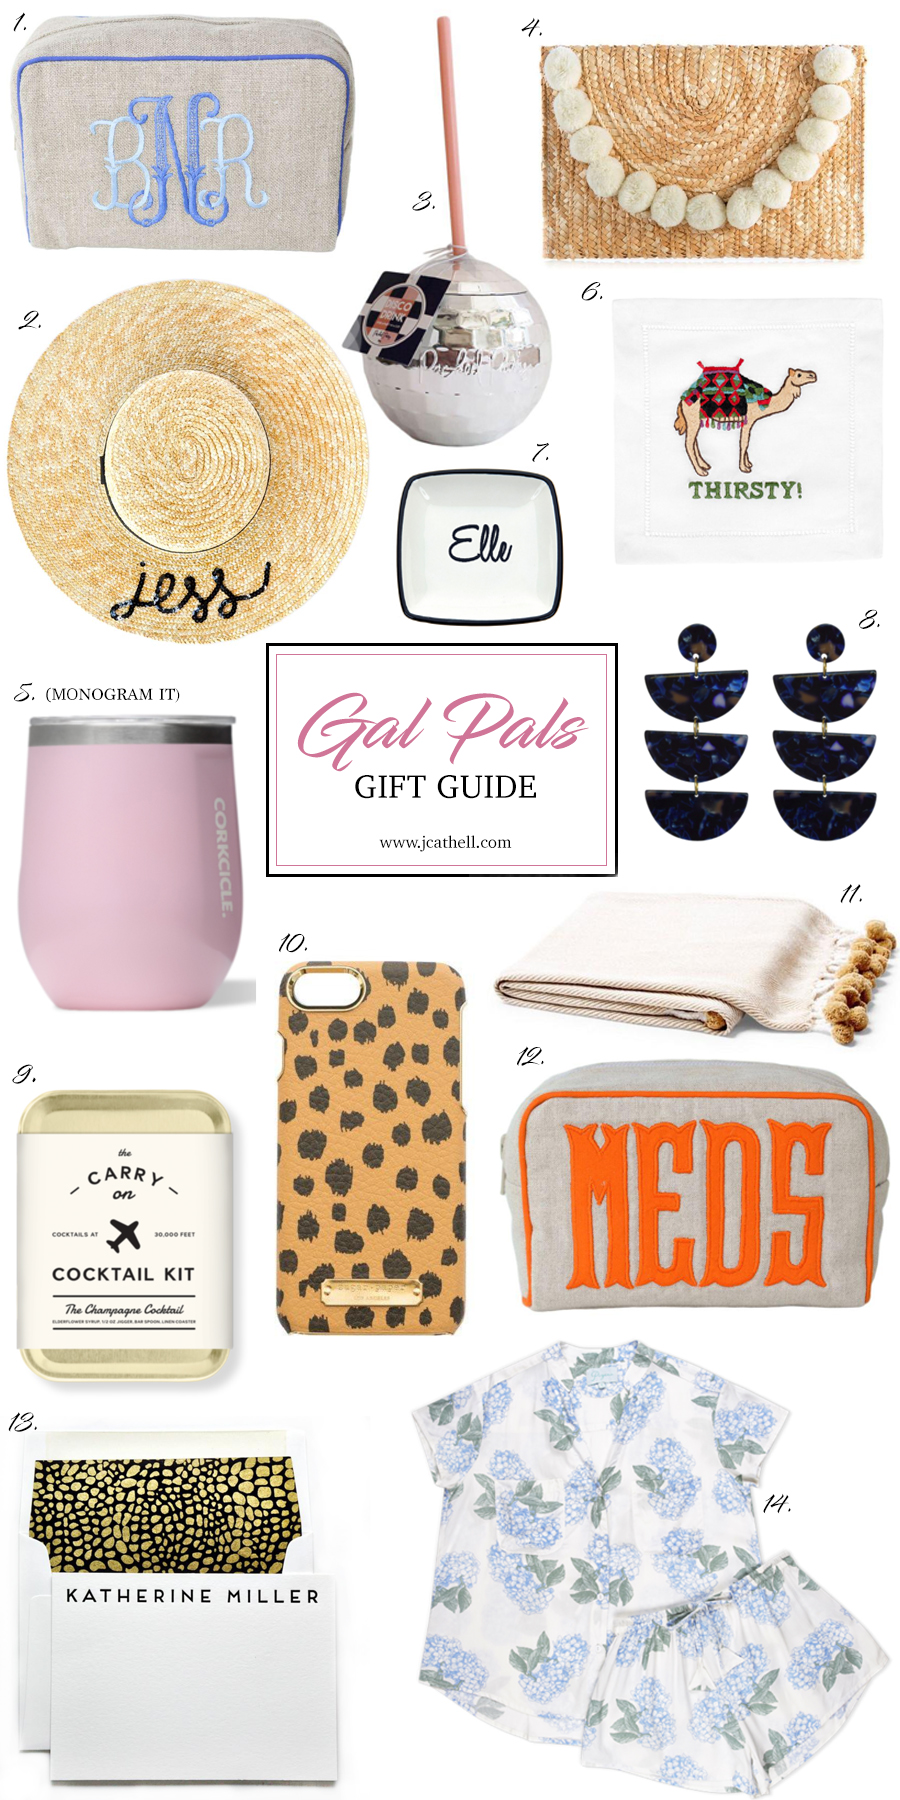 GAL PALS GIFT GUIDE